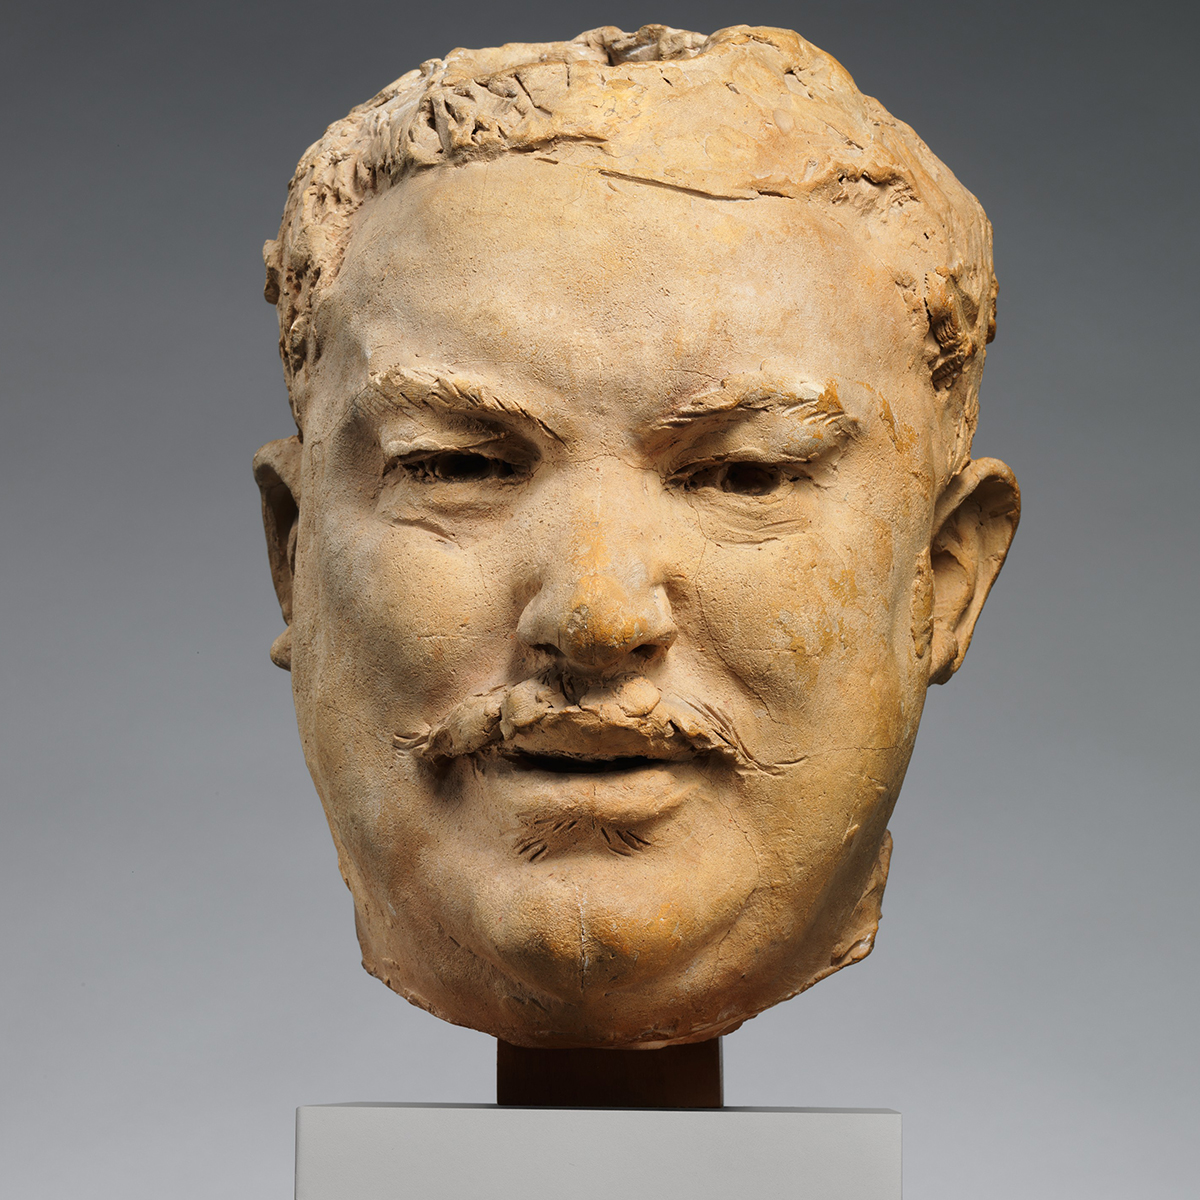 Frontal view of the sculpted head of a man with a mustache.